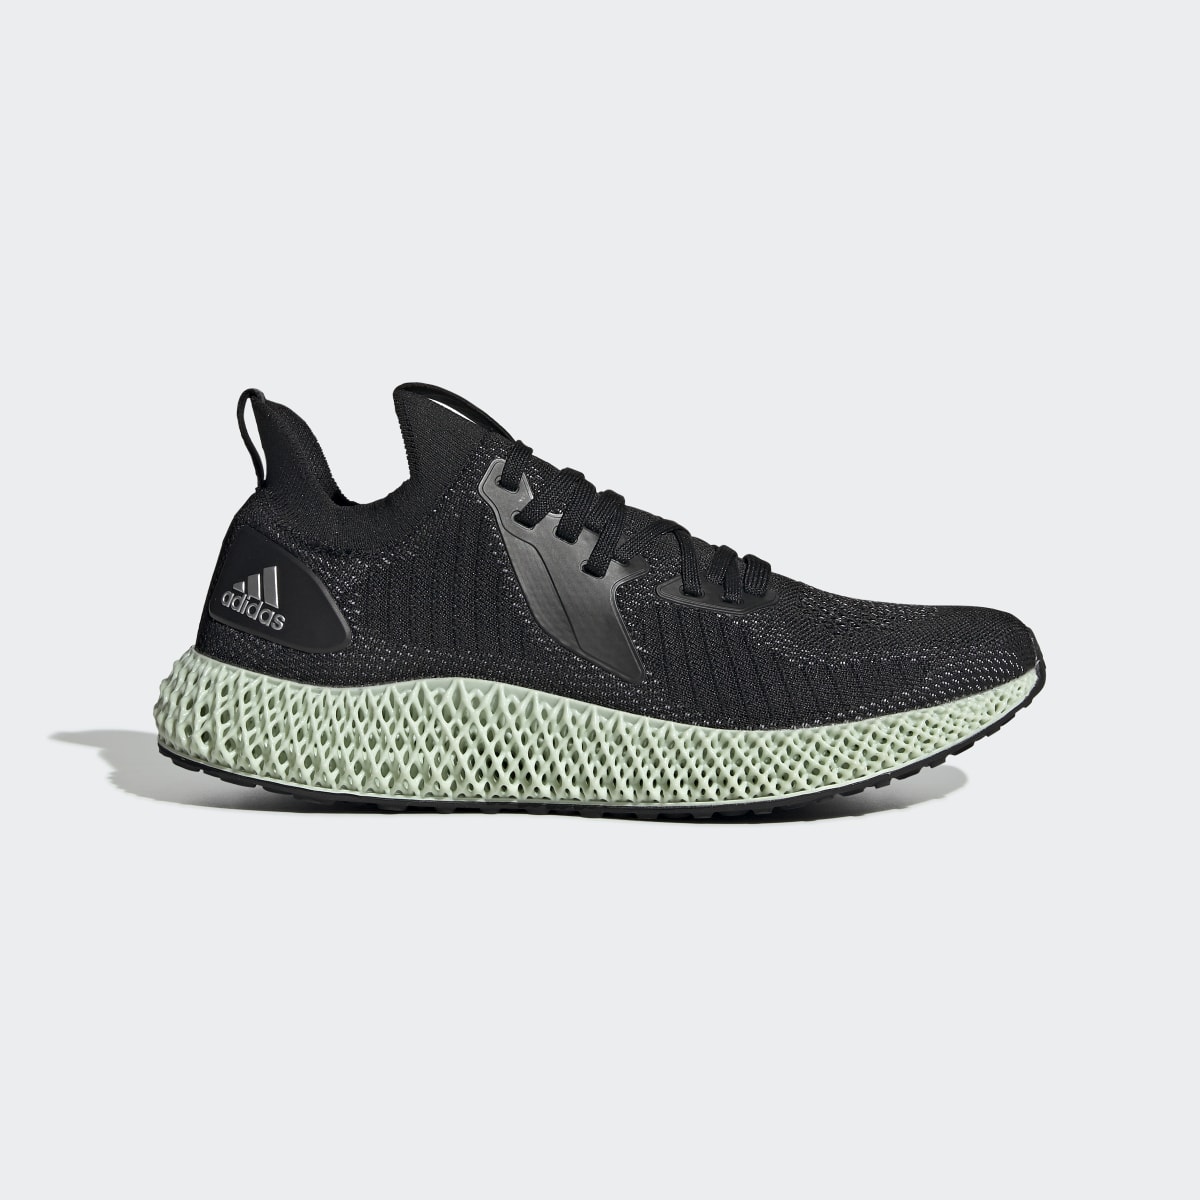 adidas us outlet - 58% remise - www 